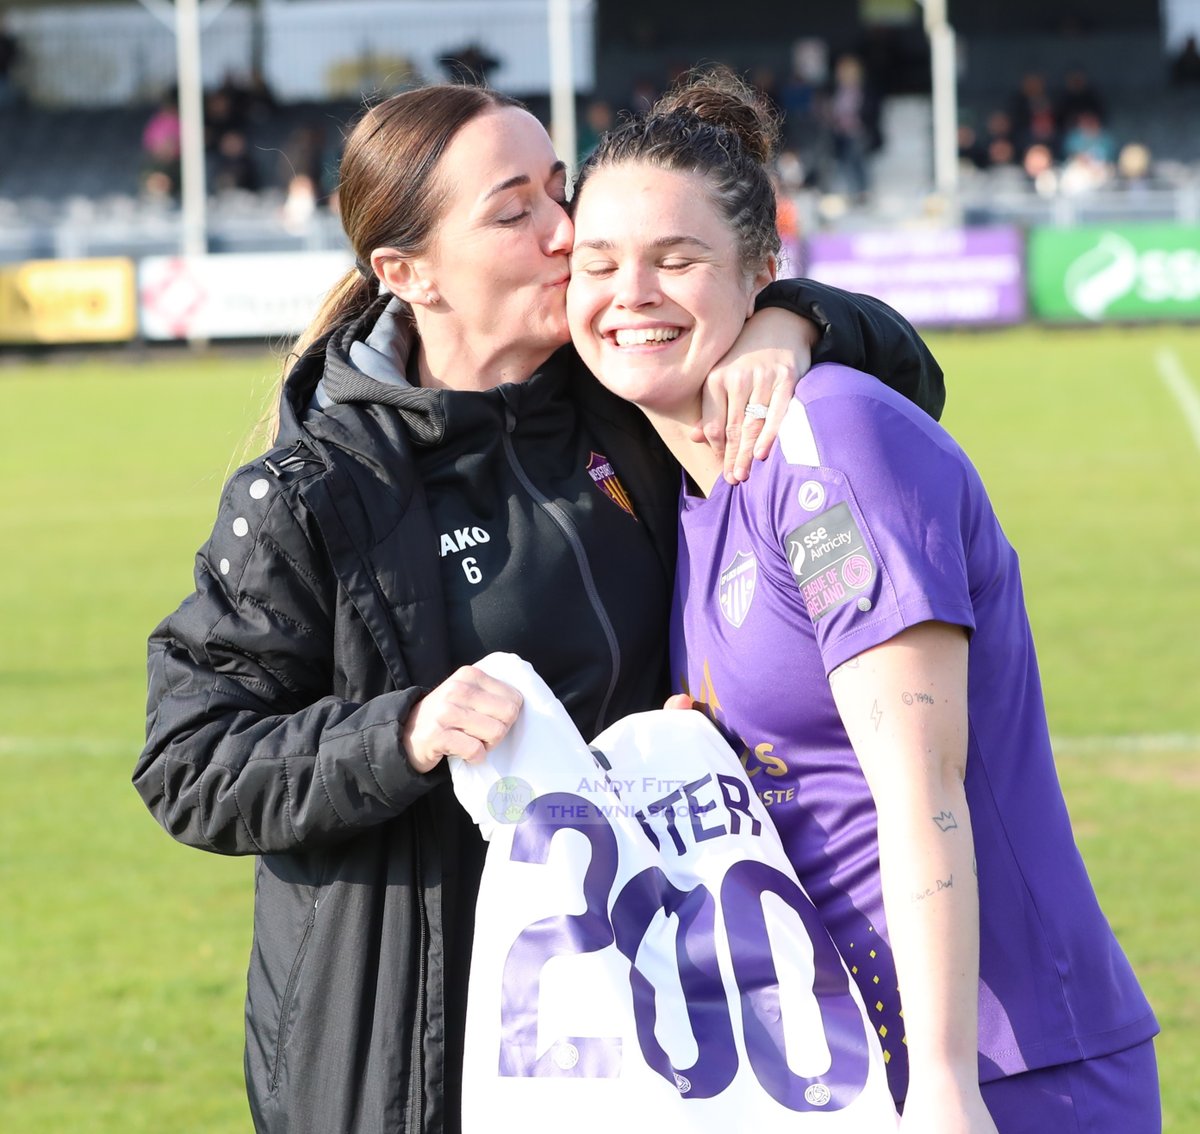 Yesterday was a very special day for @WexfordFCWomen player @ciararossy as she played her 200th game for the youths, presented here with her jersey from club legend @Murphy10Kylie. 📸 @fitzer_andy